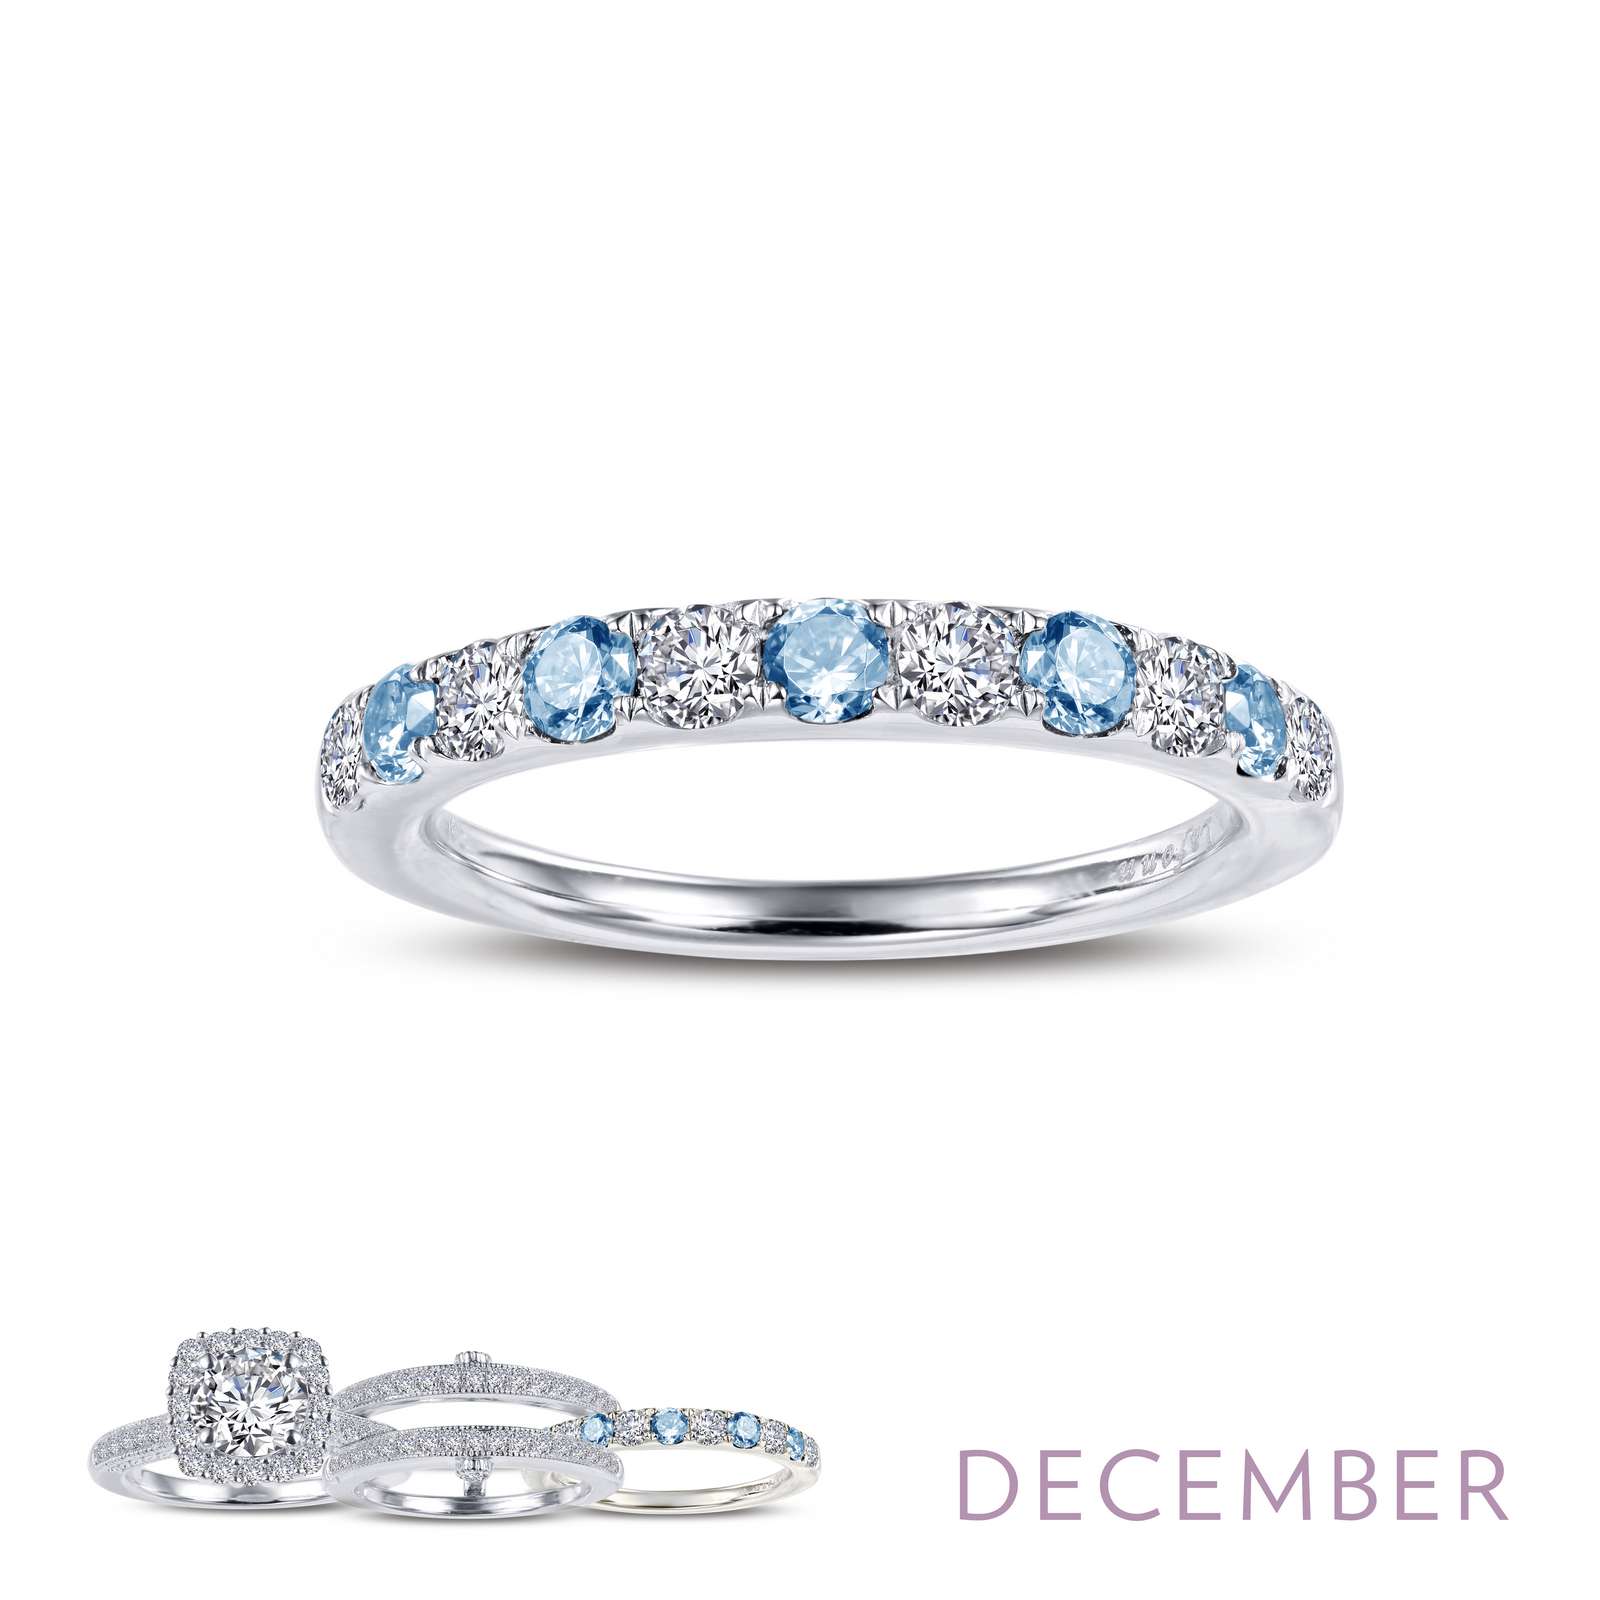 December Birthstone Ring Griner Jewelry Co. Moultrie, GA